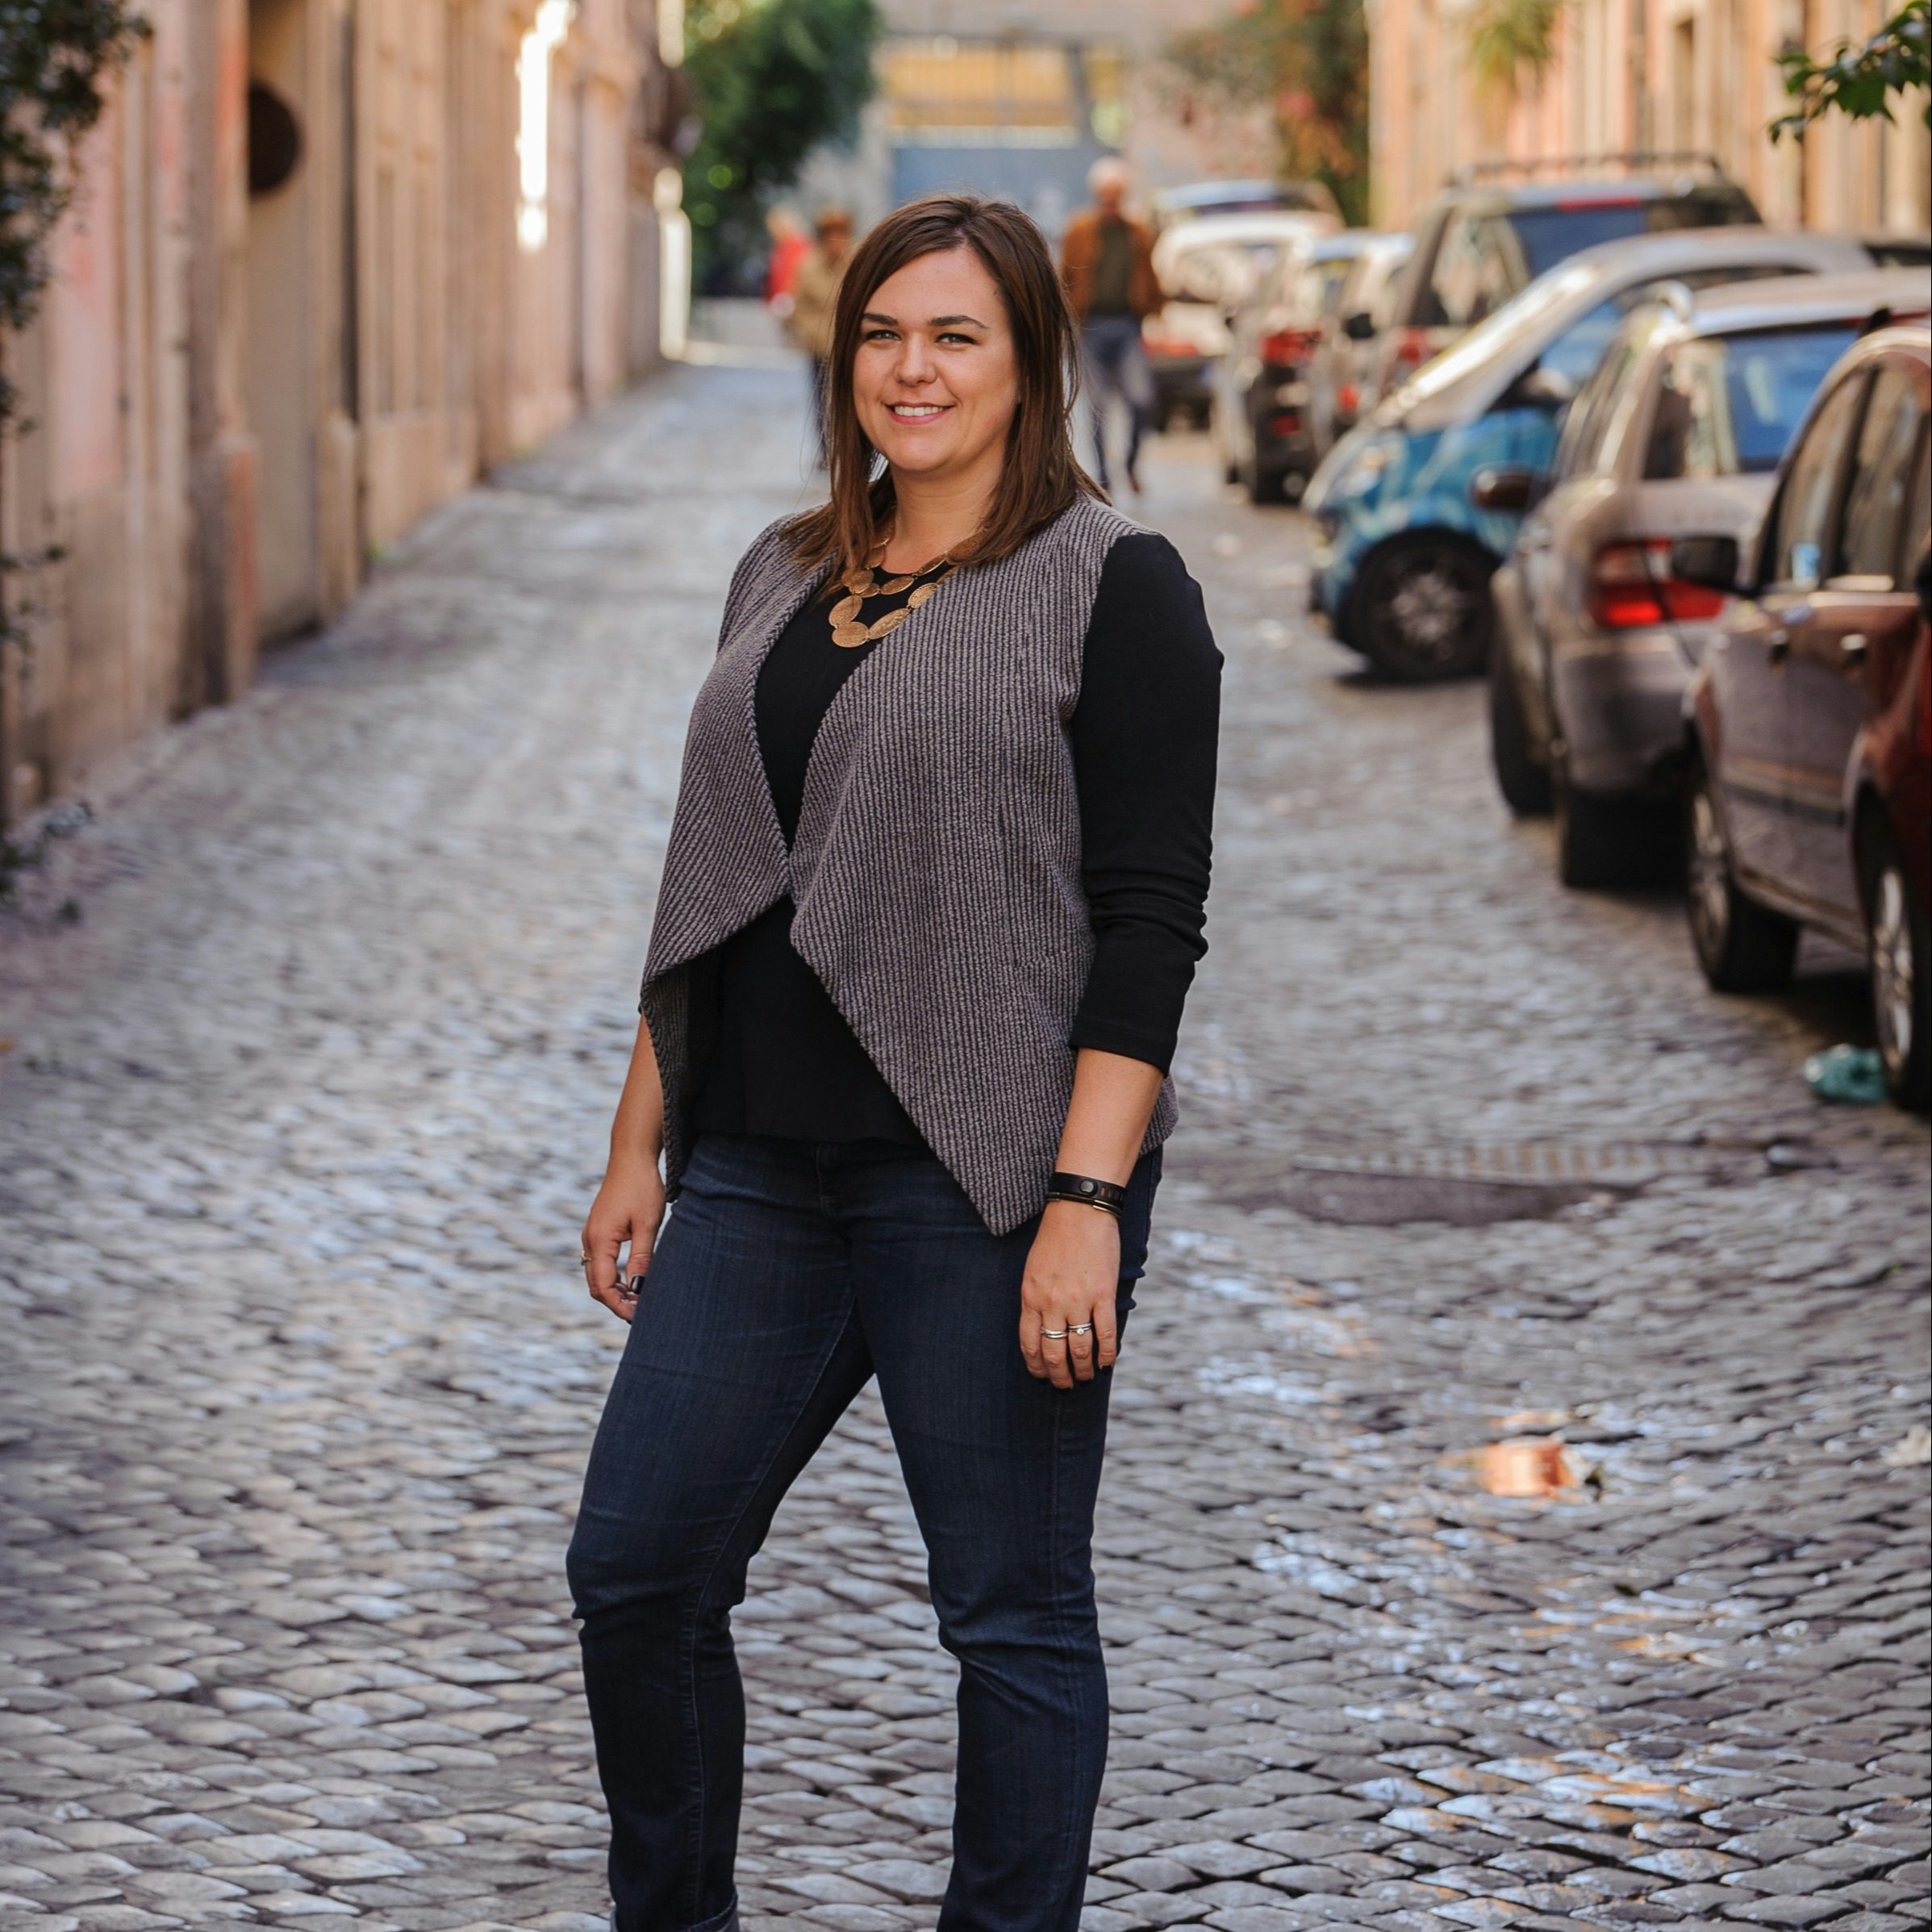 Travel Advisor Ashley Metesh standing on a European cobblestone street with cars in the background.